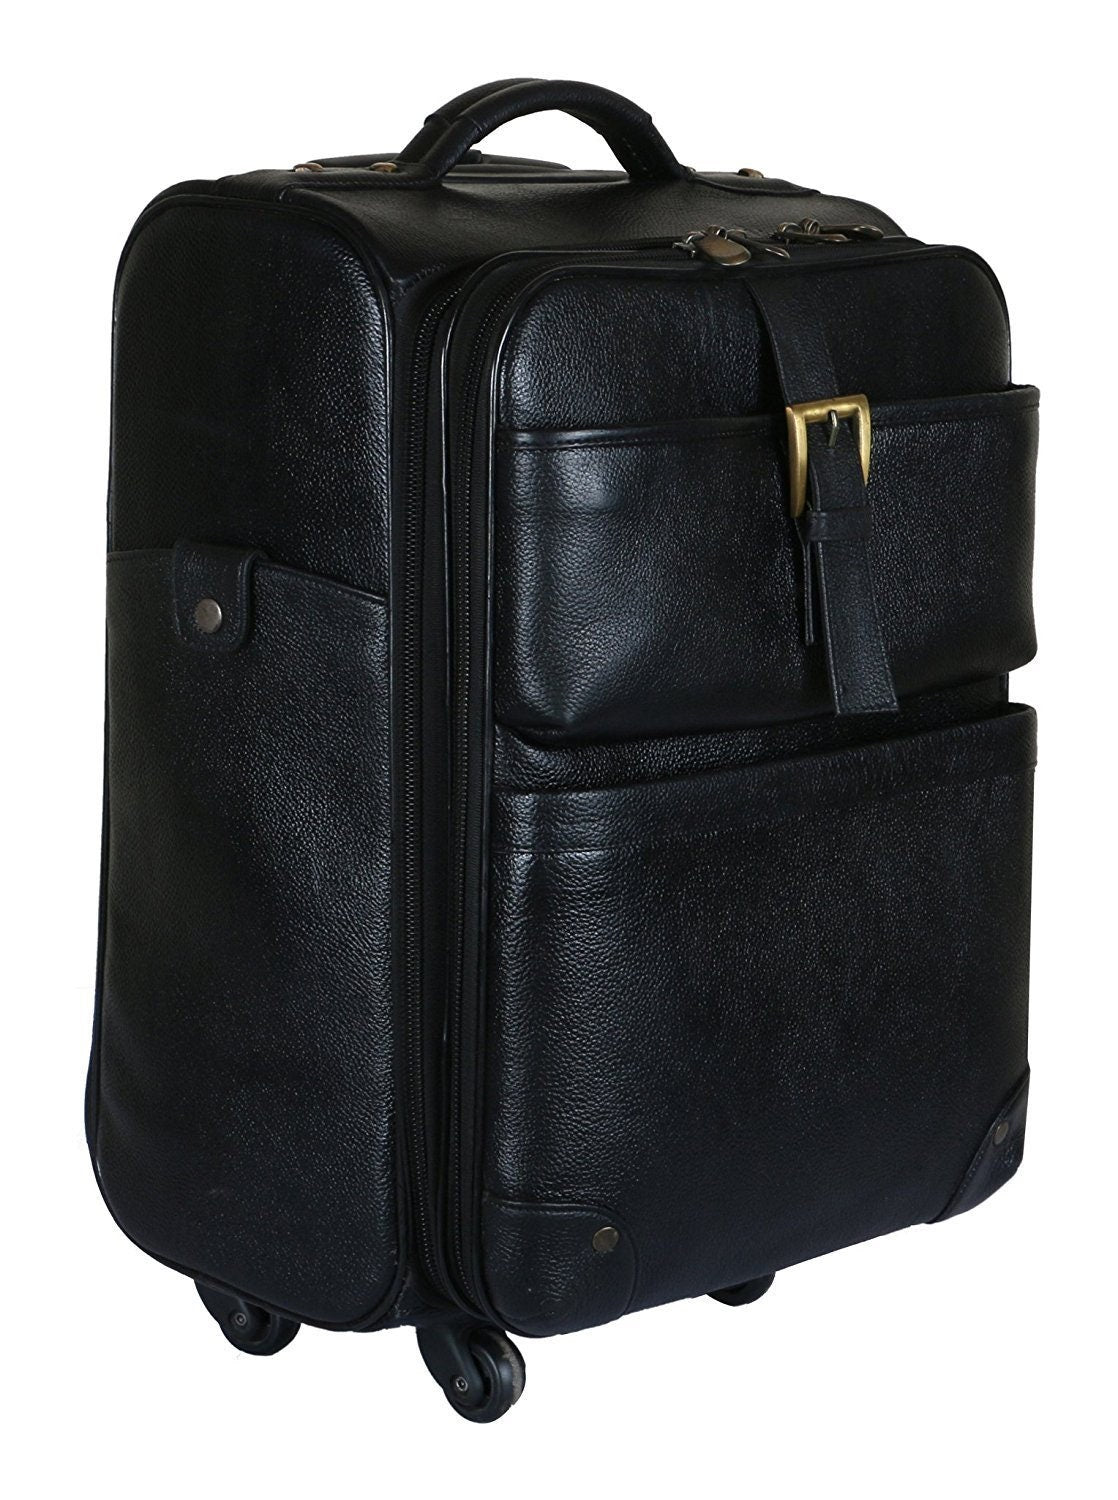 Genuine Leather Black Trolley Bag Airport Cabin Bag Leather Weekender Leather Luggage with Wheels Gift For Him